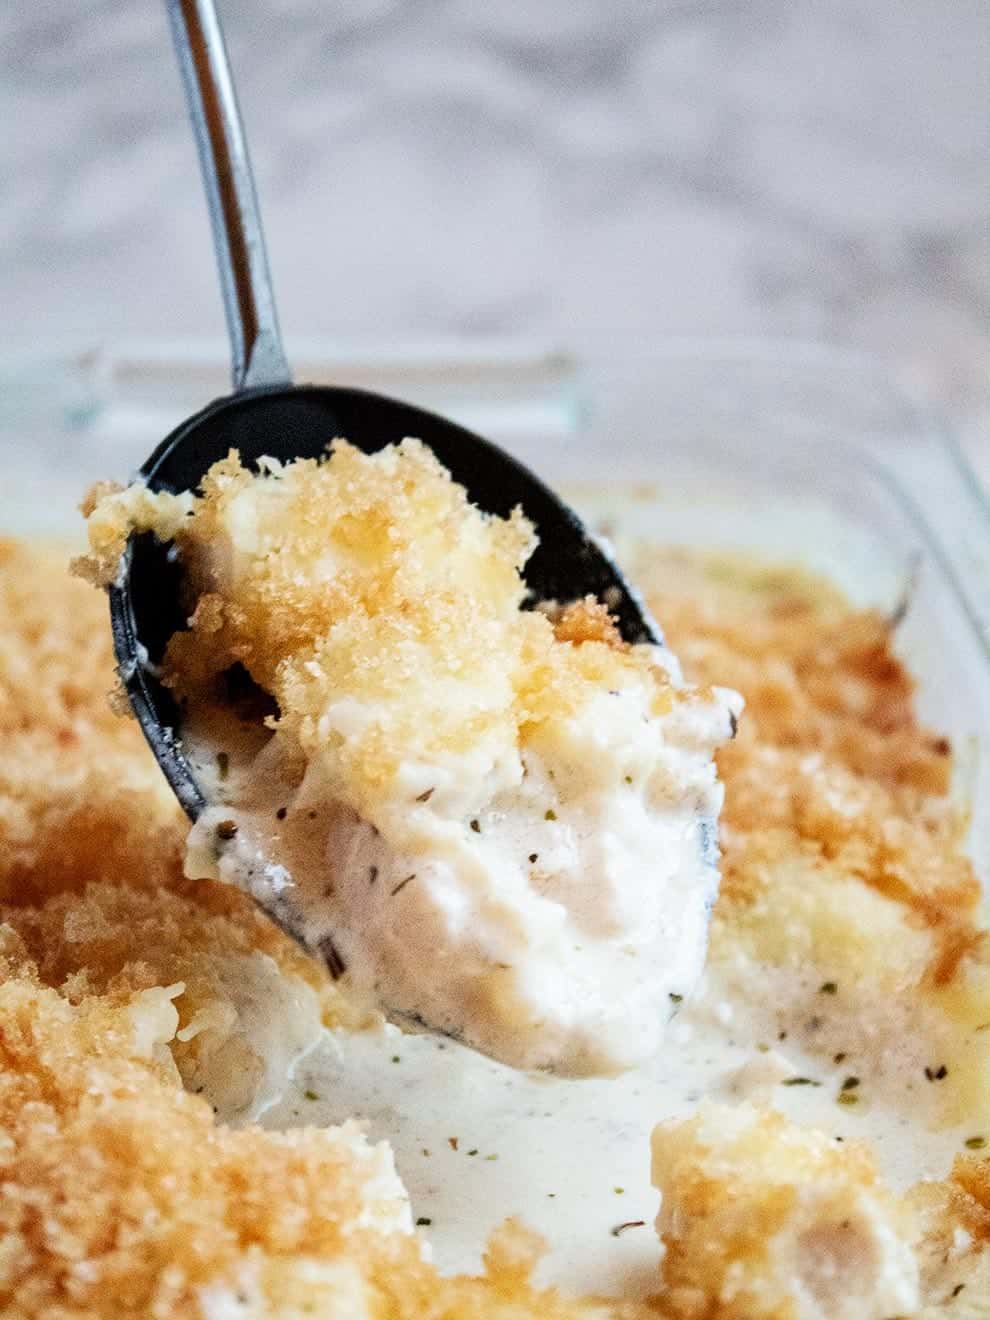 keto alfredo casserole with a large black spoon dipped into the dish